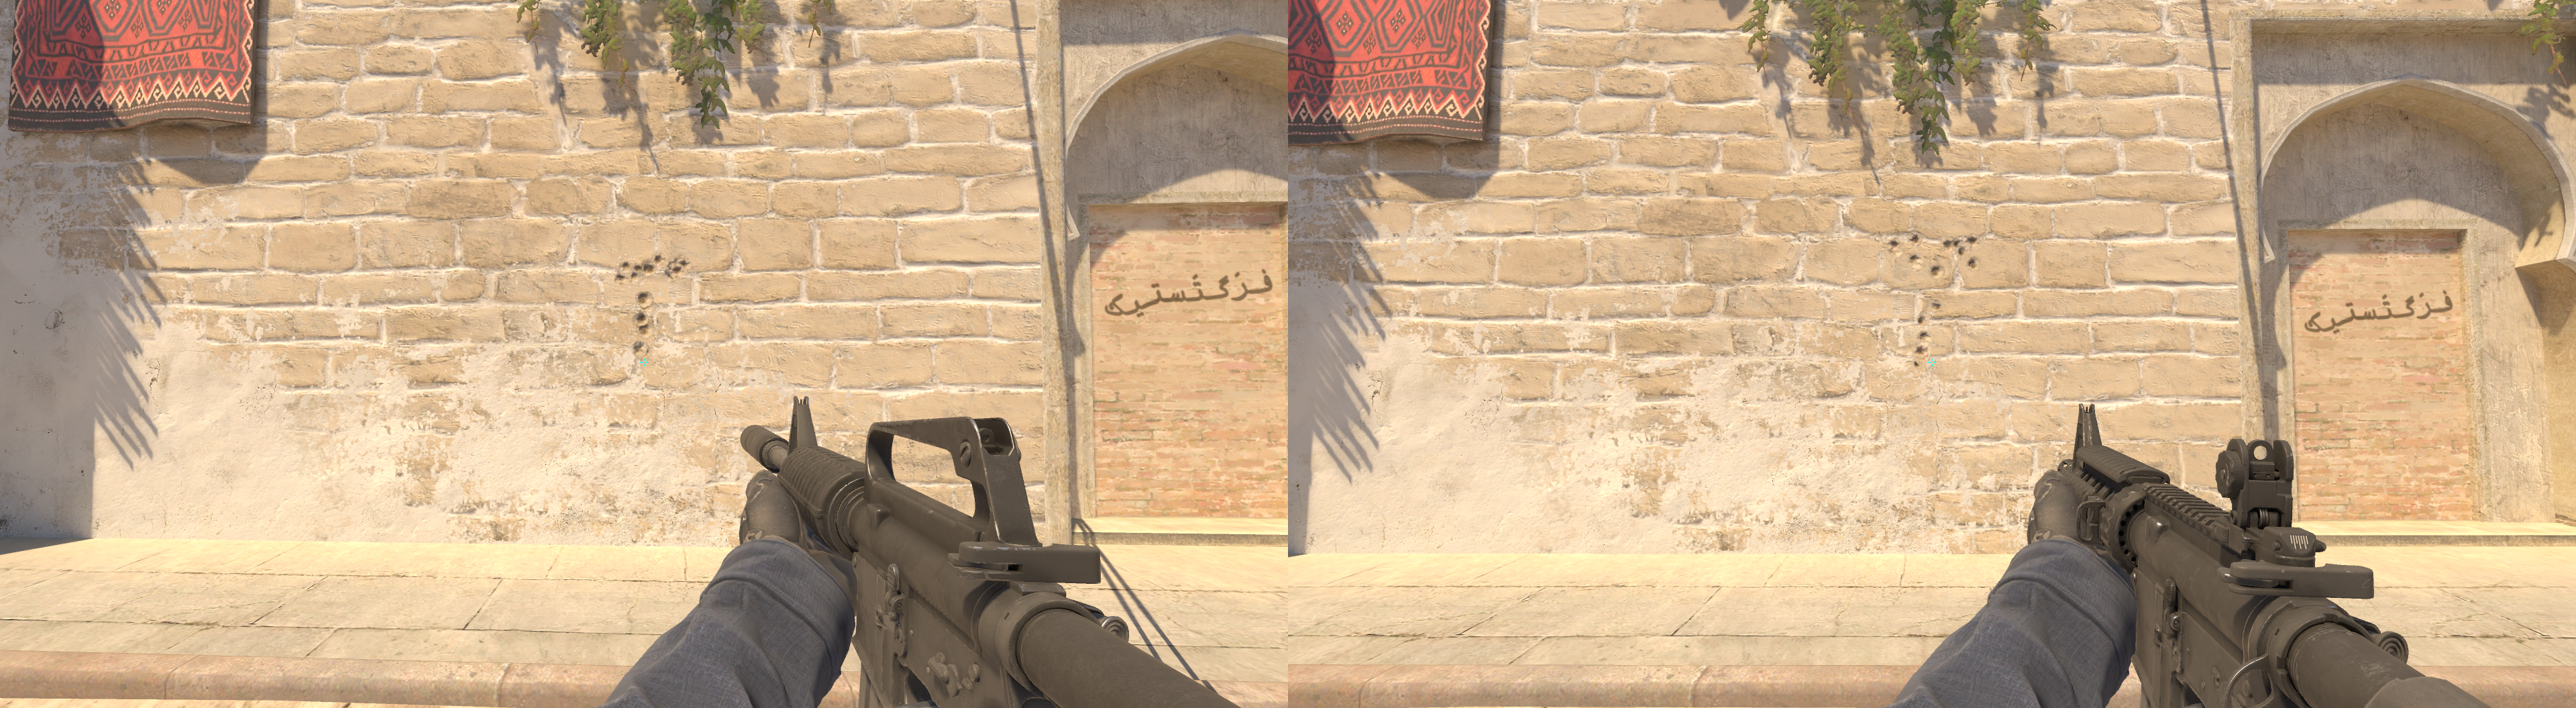 Image on the left shows the spray pattern of the M4A1-S in CS2, while the right-side image shows the spray pattern of the M4A4 in CS2.